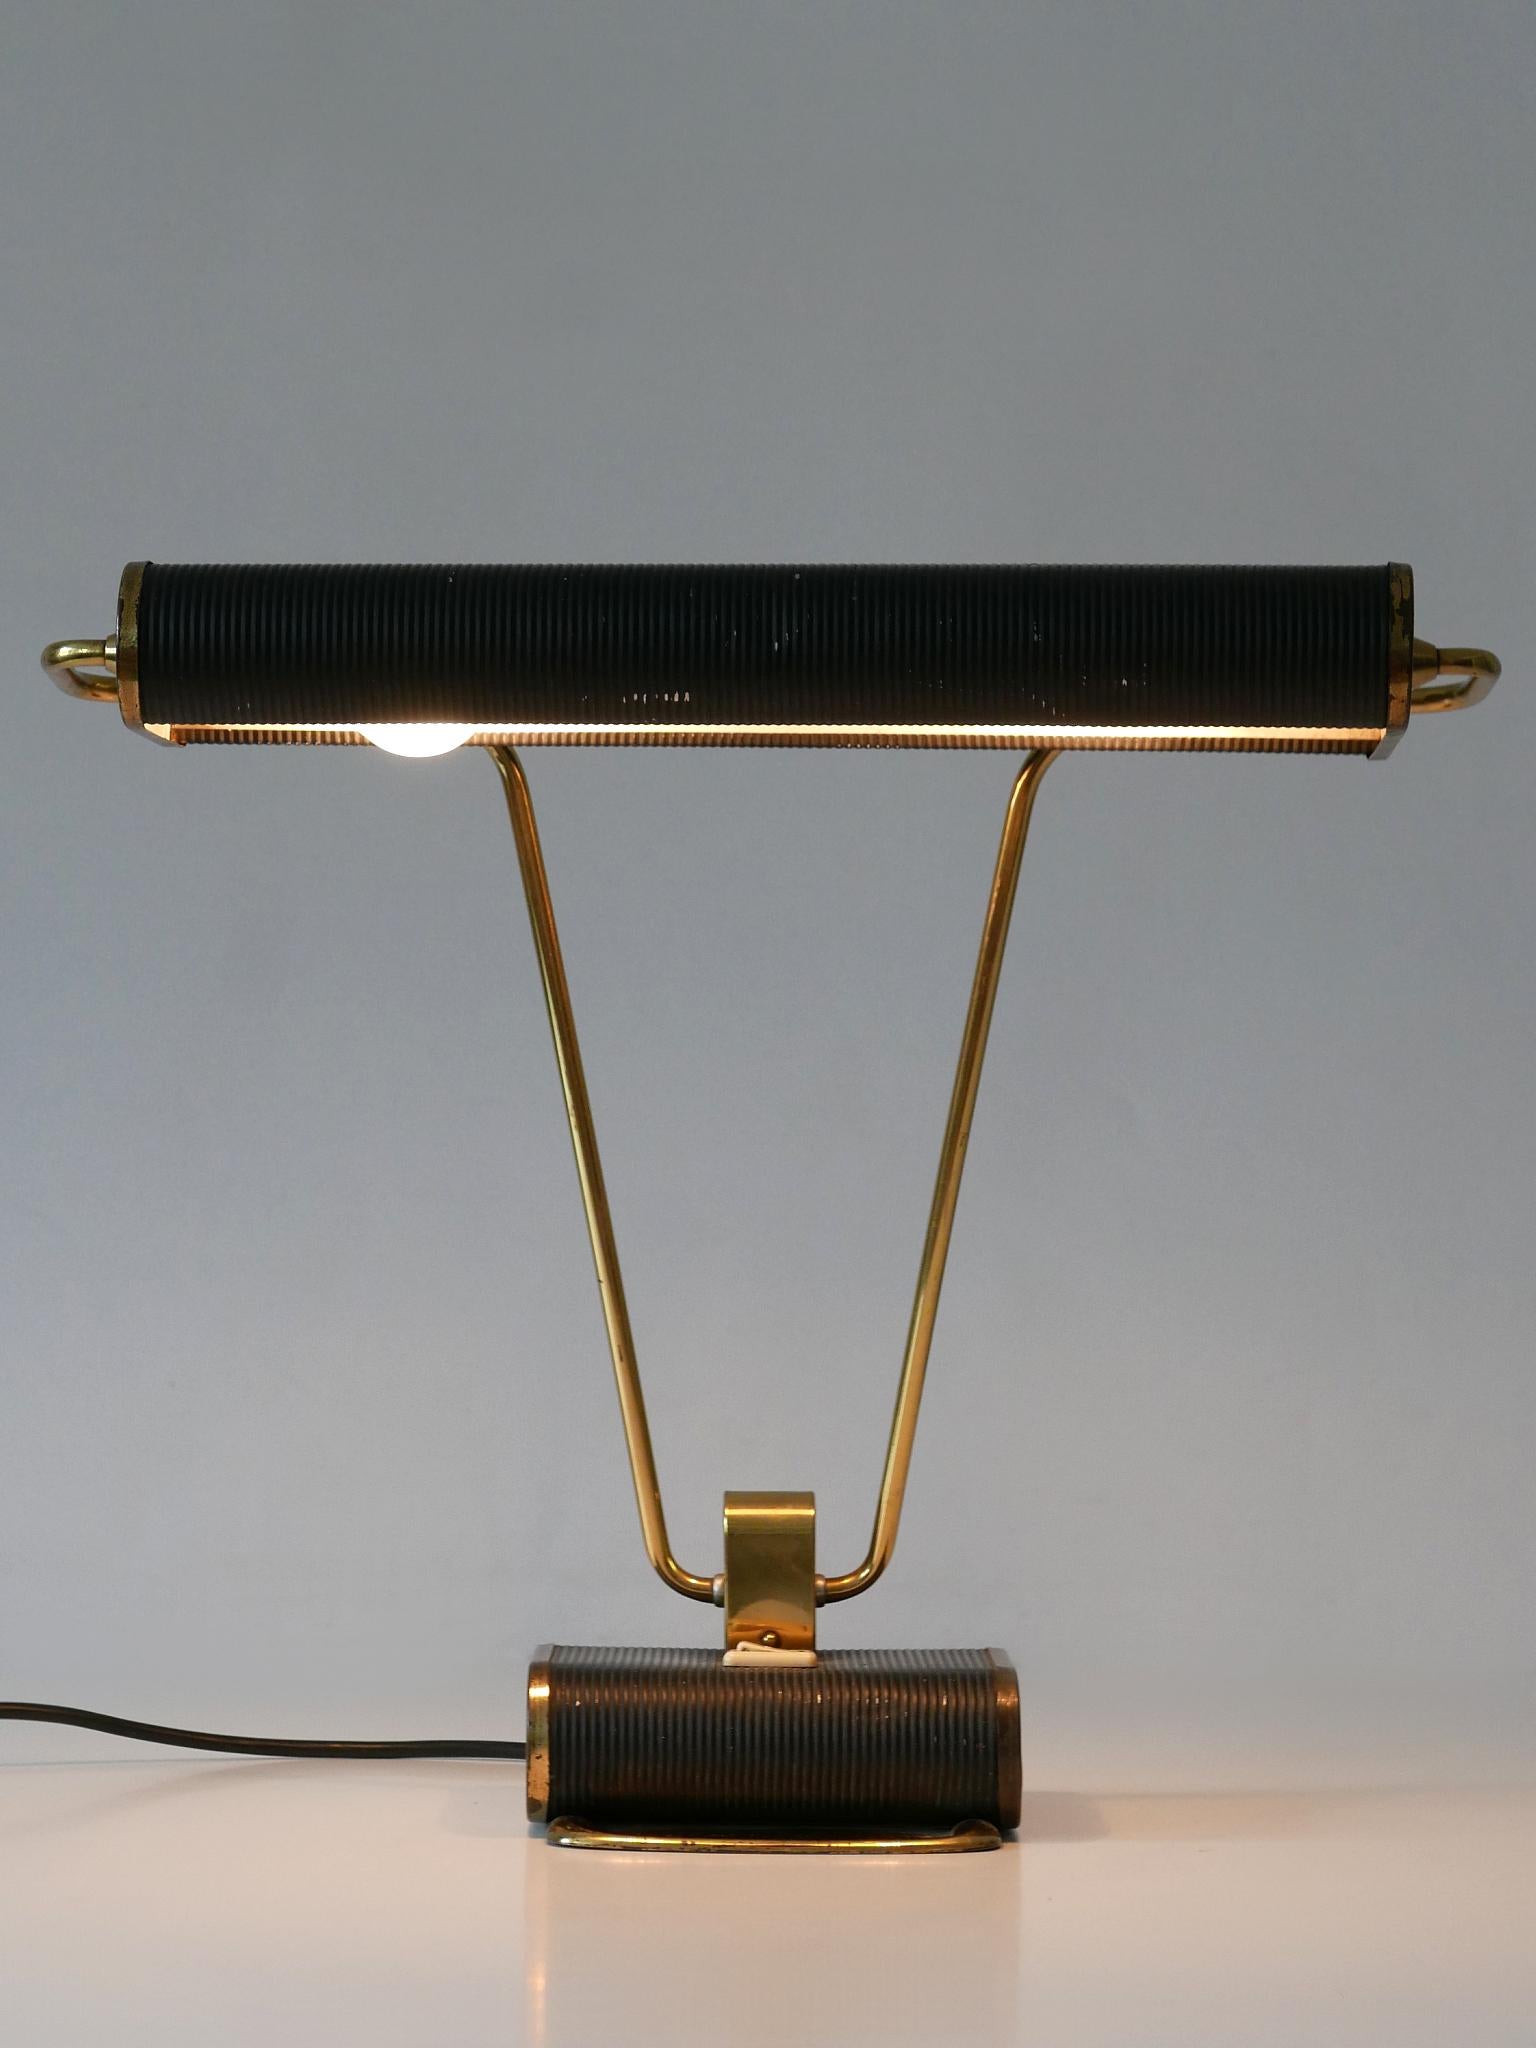 Art Deco Table Lamp or Desk Light 'No 71' by André Mounique for Jumo 1930s For Sale 1